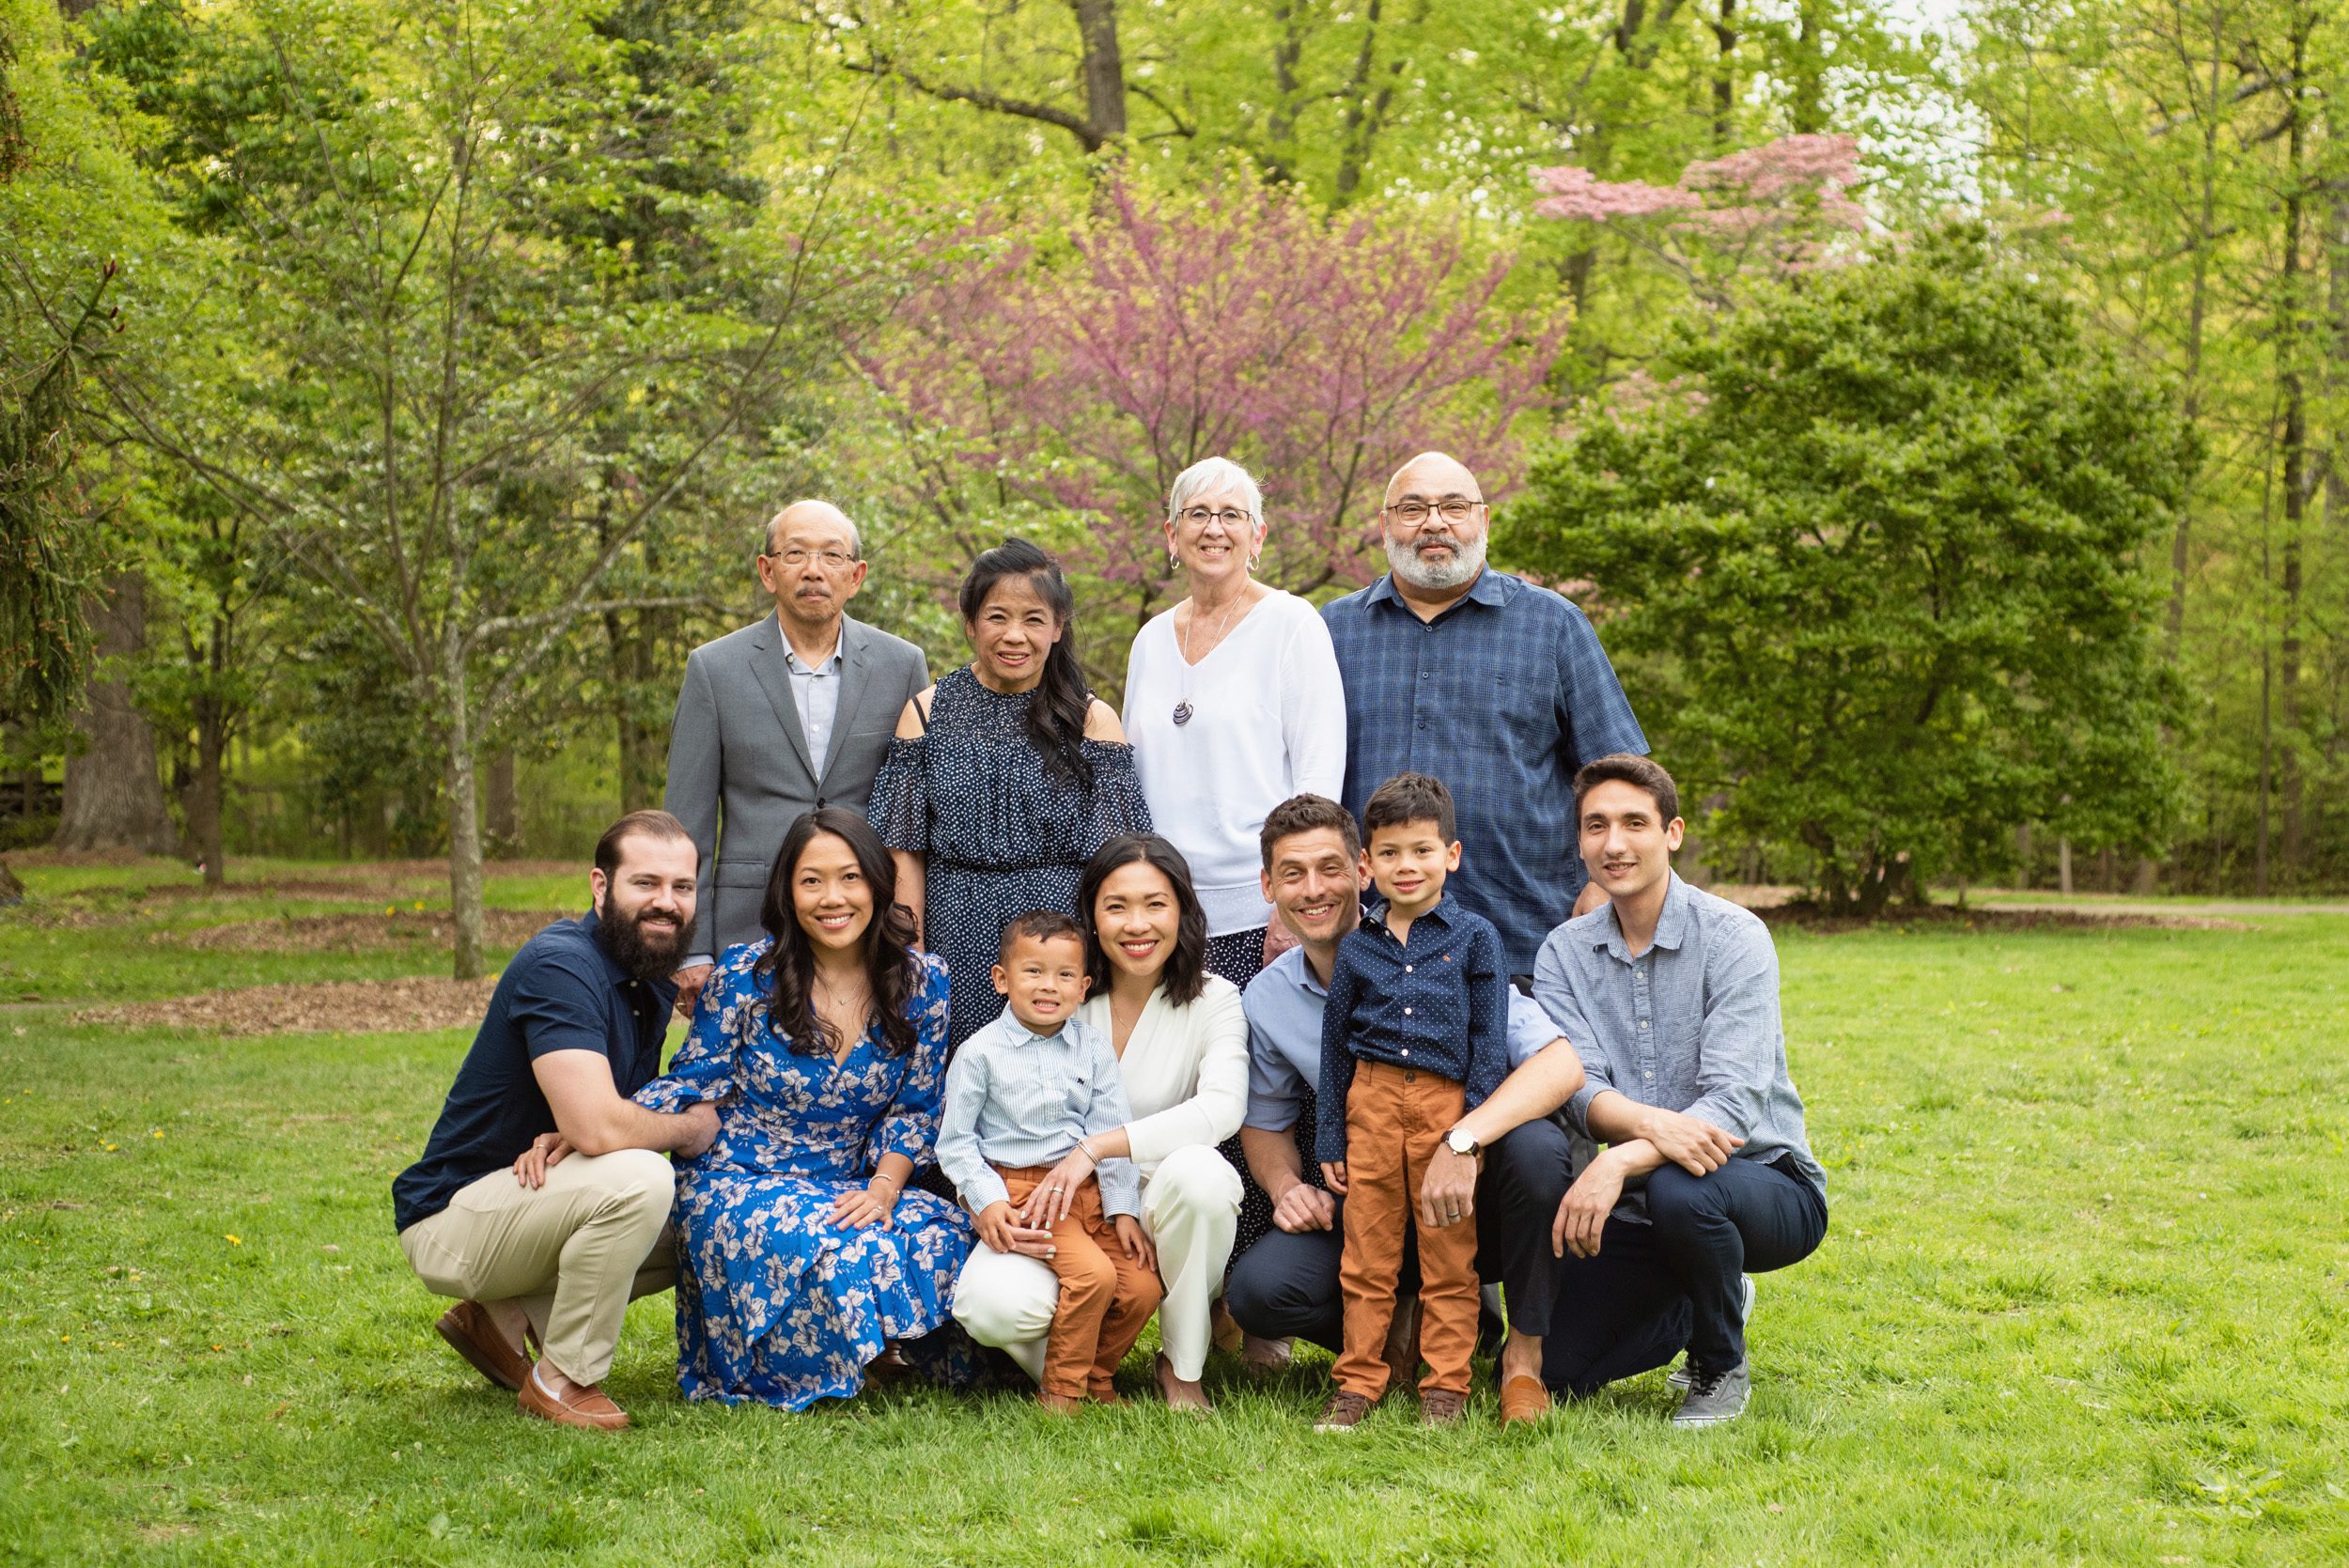 An extended family with both sets of grandparents standing behind their kids and grandkids in a grassy field with redbud trees blooming in the background during an extended family photo session